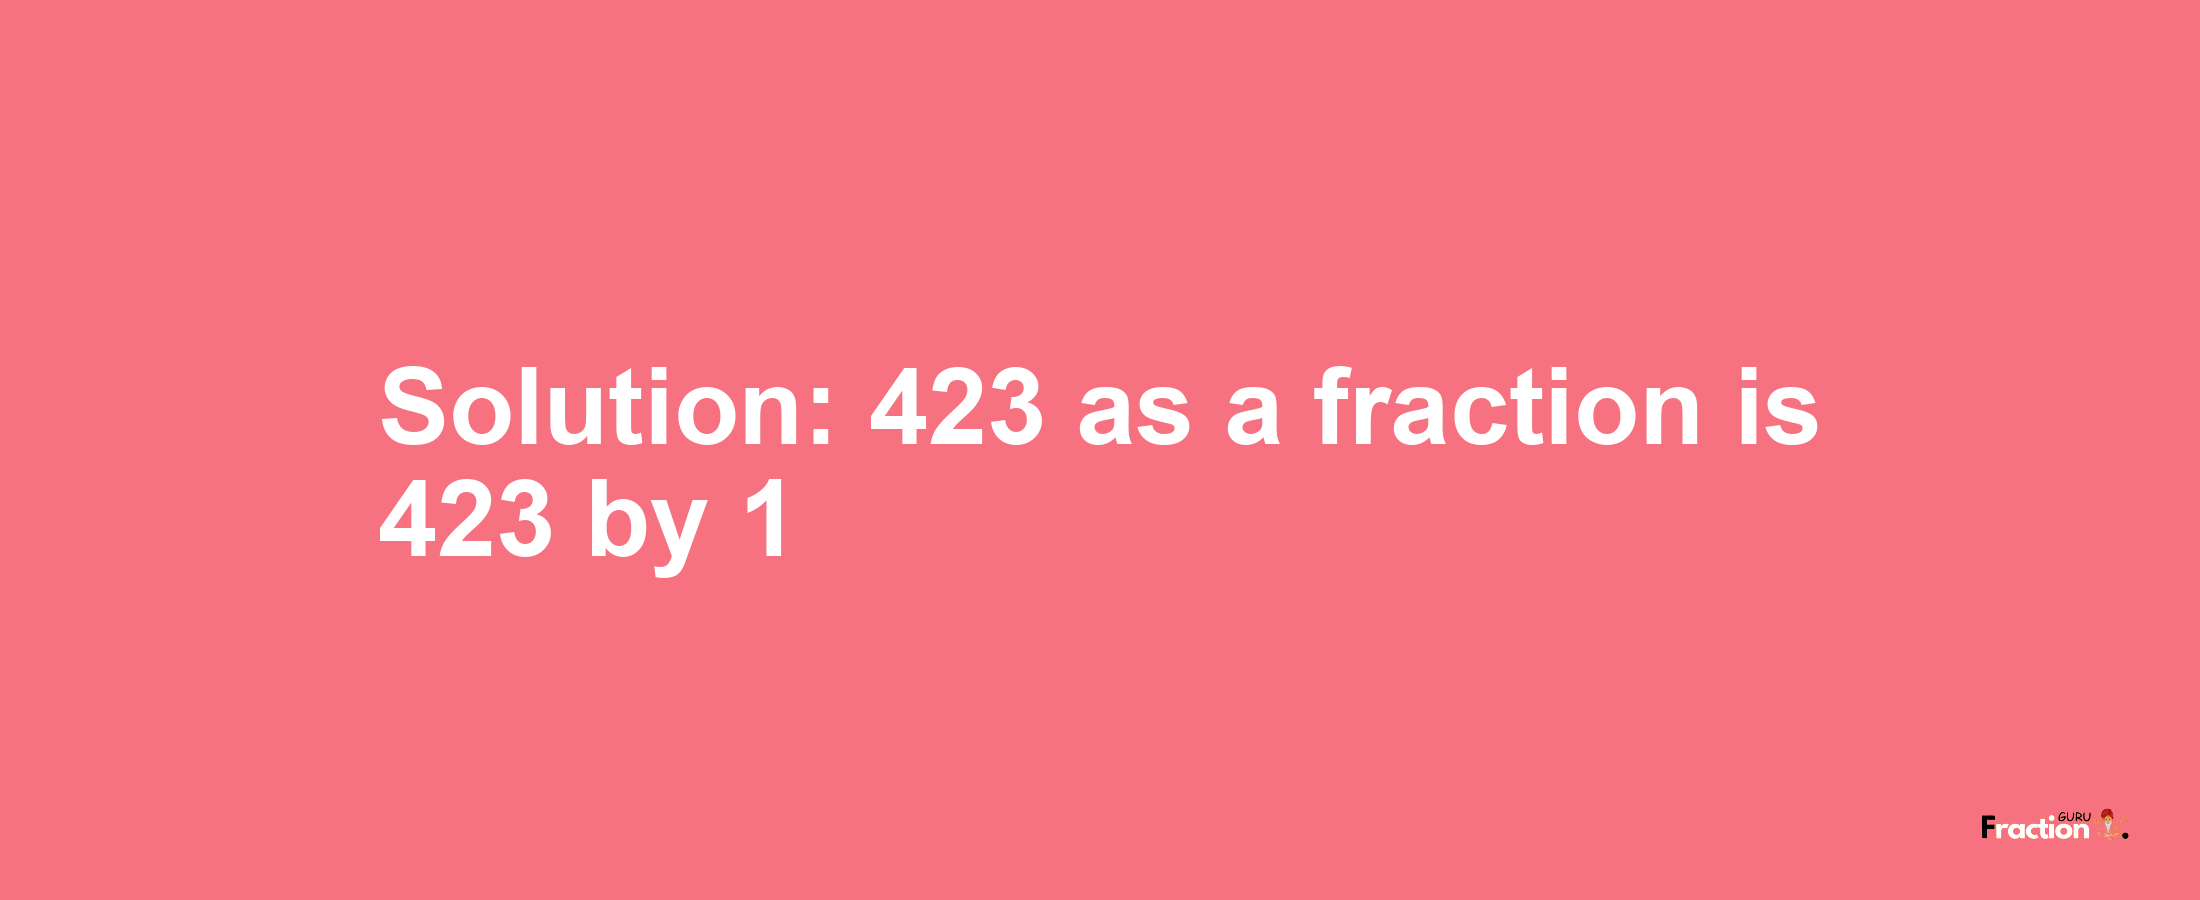 Solution:423 as a fraction is 423/1